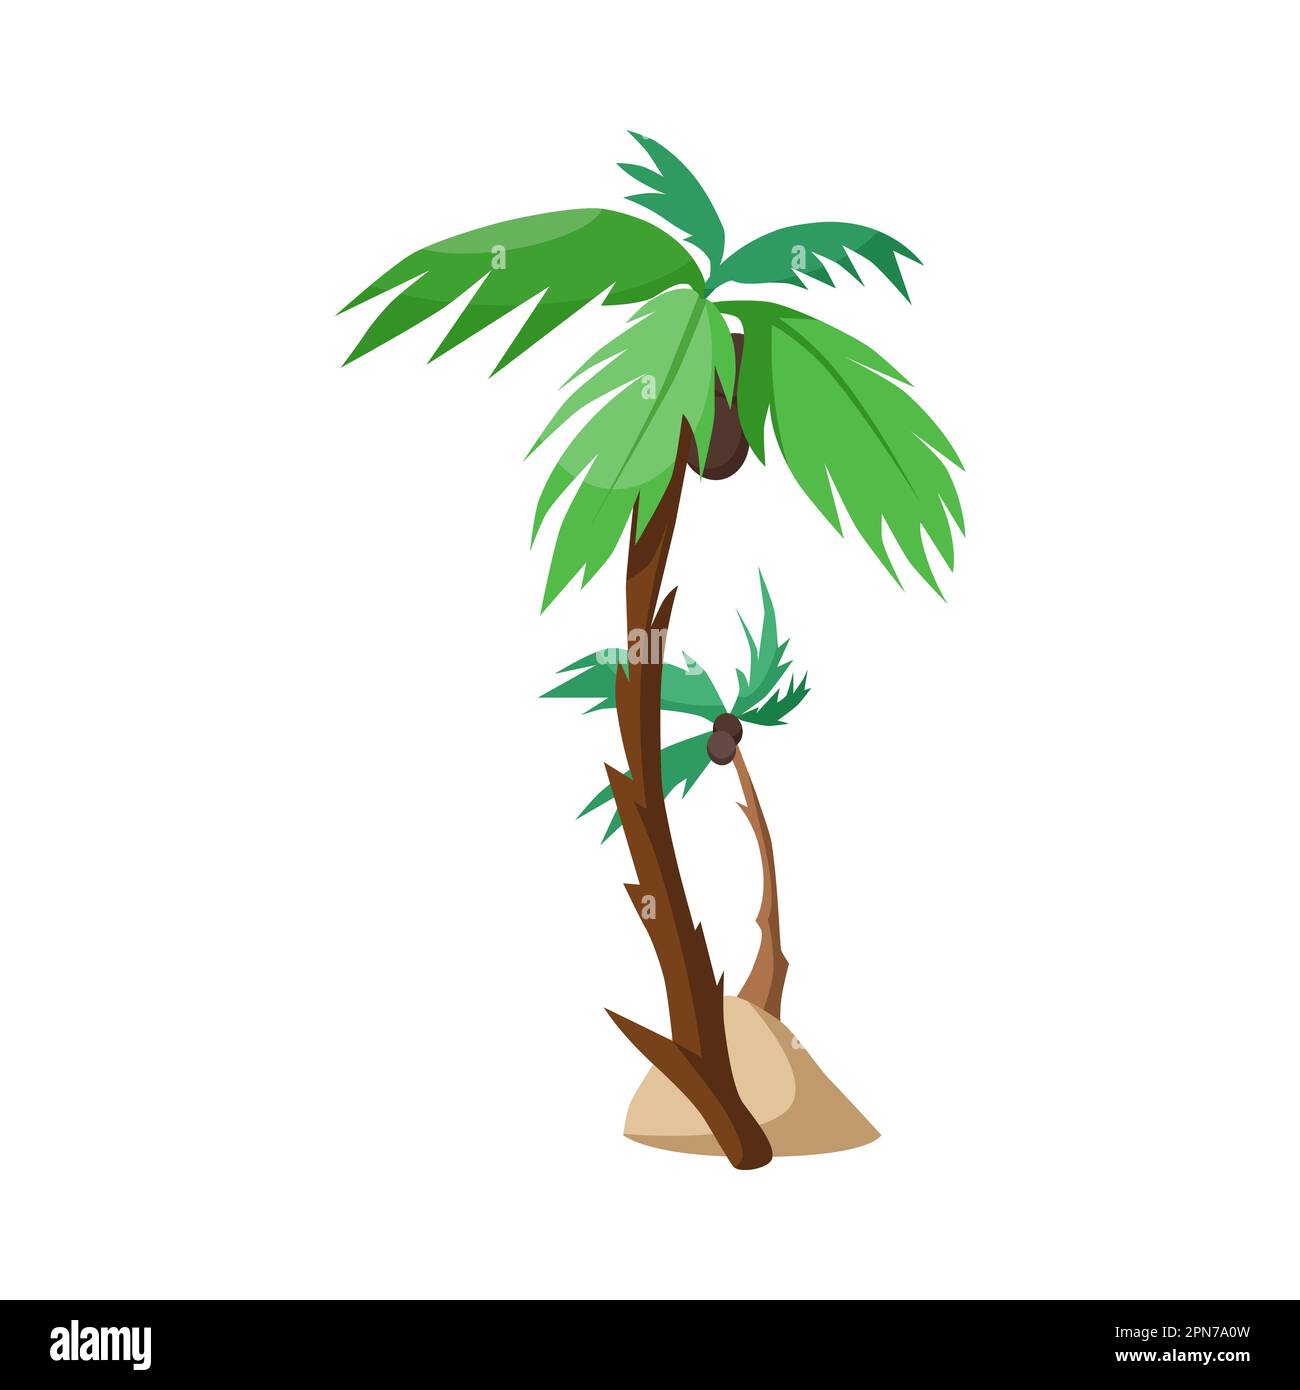 Palm trees with coconuts vector illustration Stock Vector